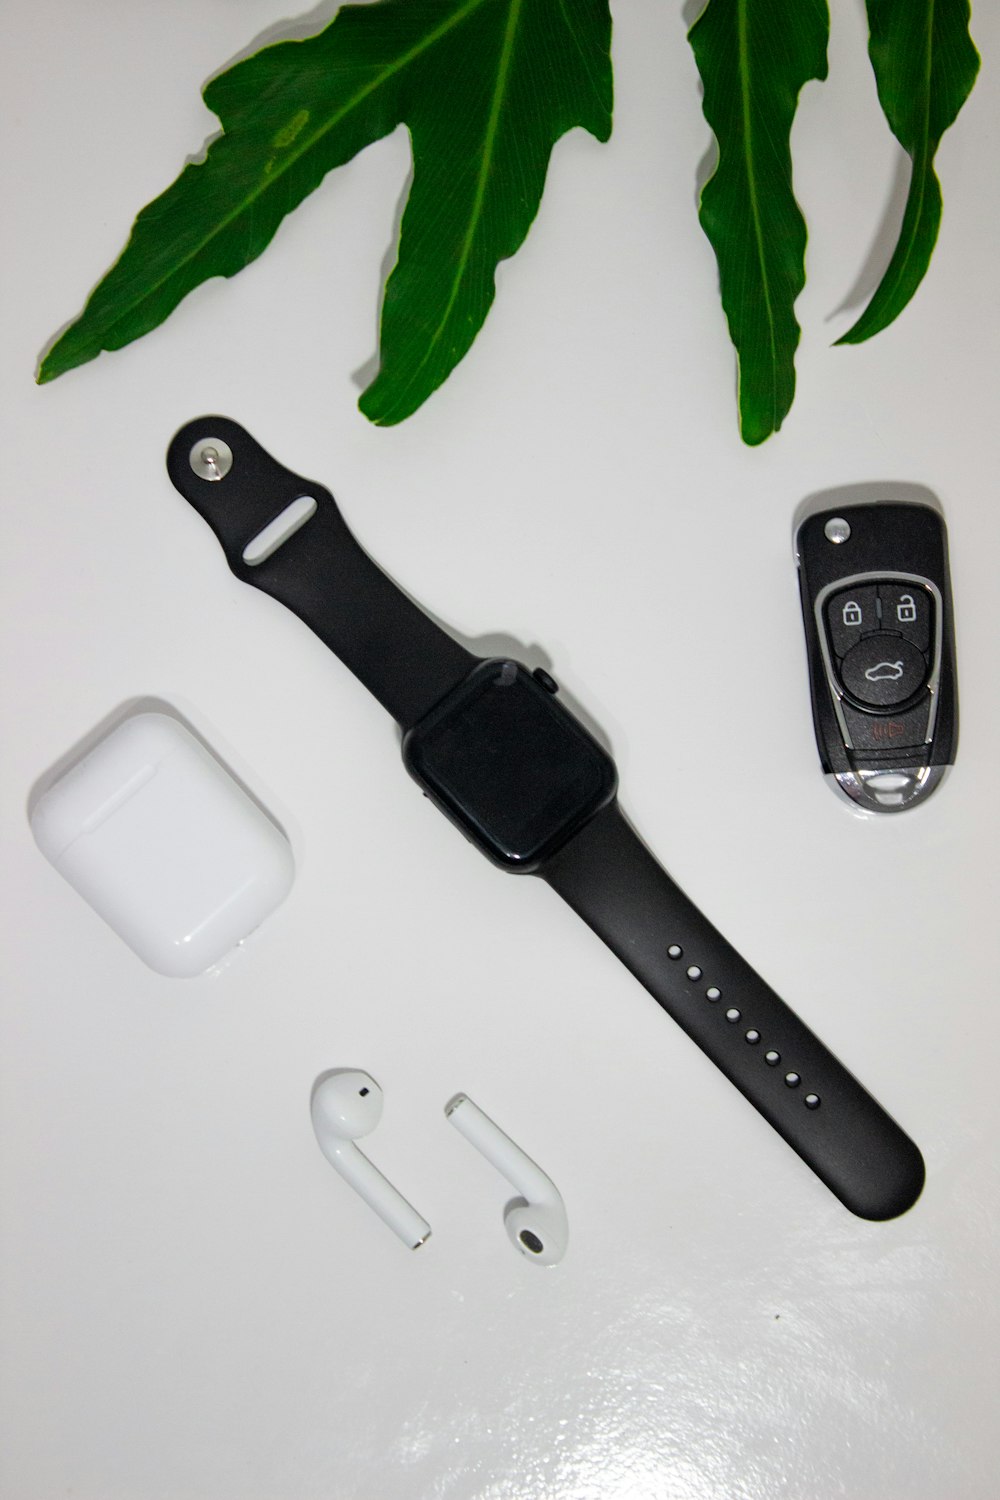 black and silver remote control beside apple watch with black sport band